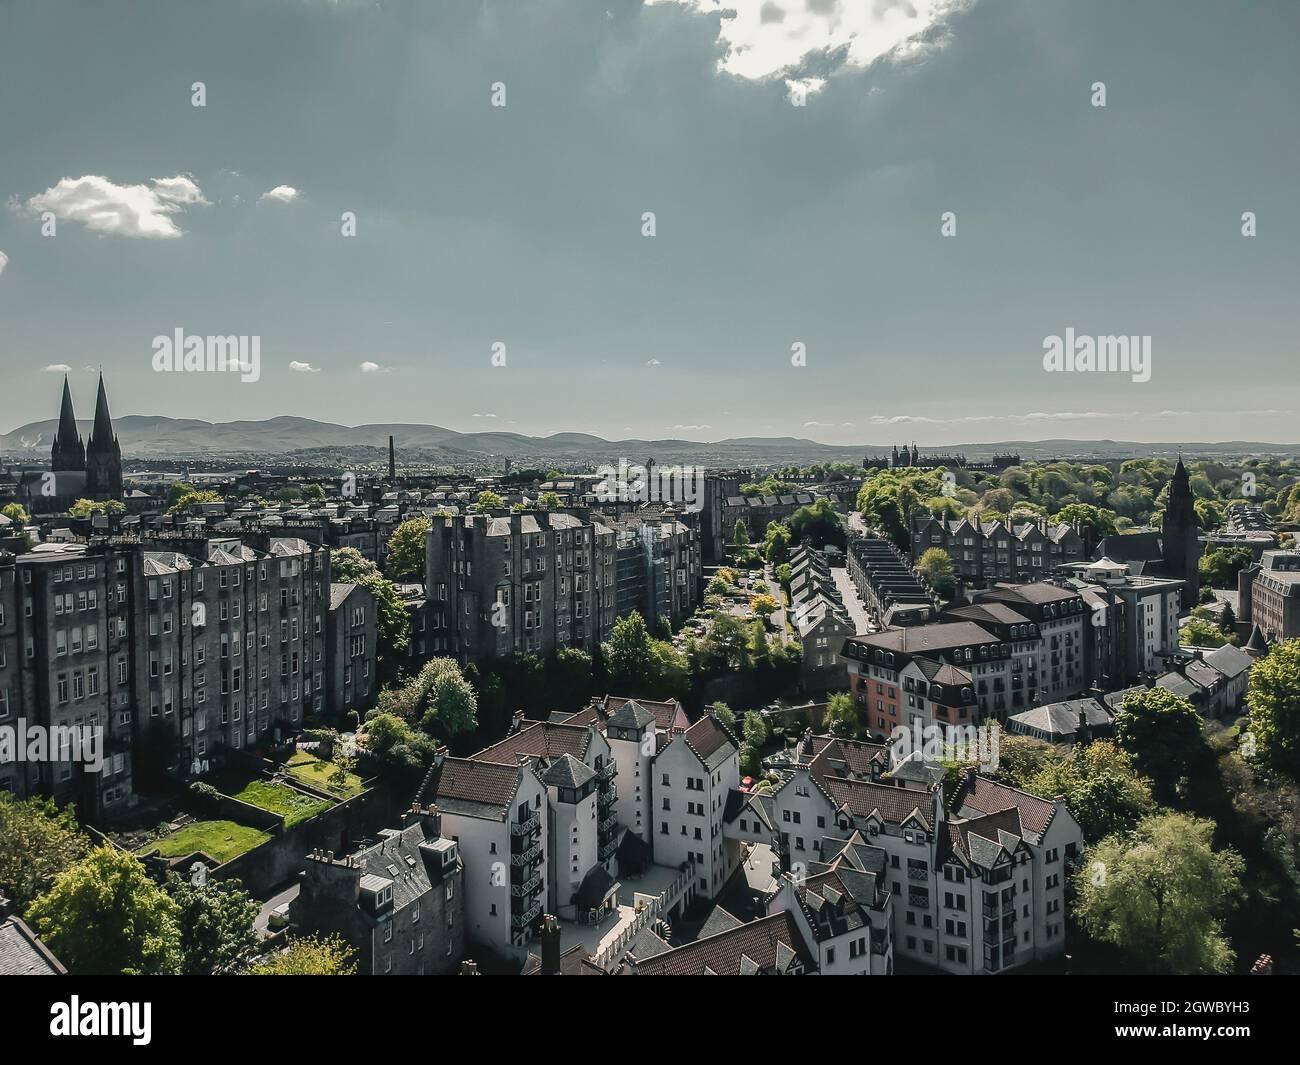 High Angle View Of City Buildings Against Cloudy Sky Stock Photo